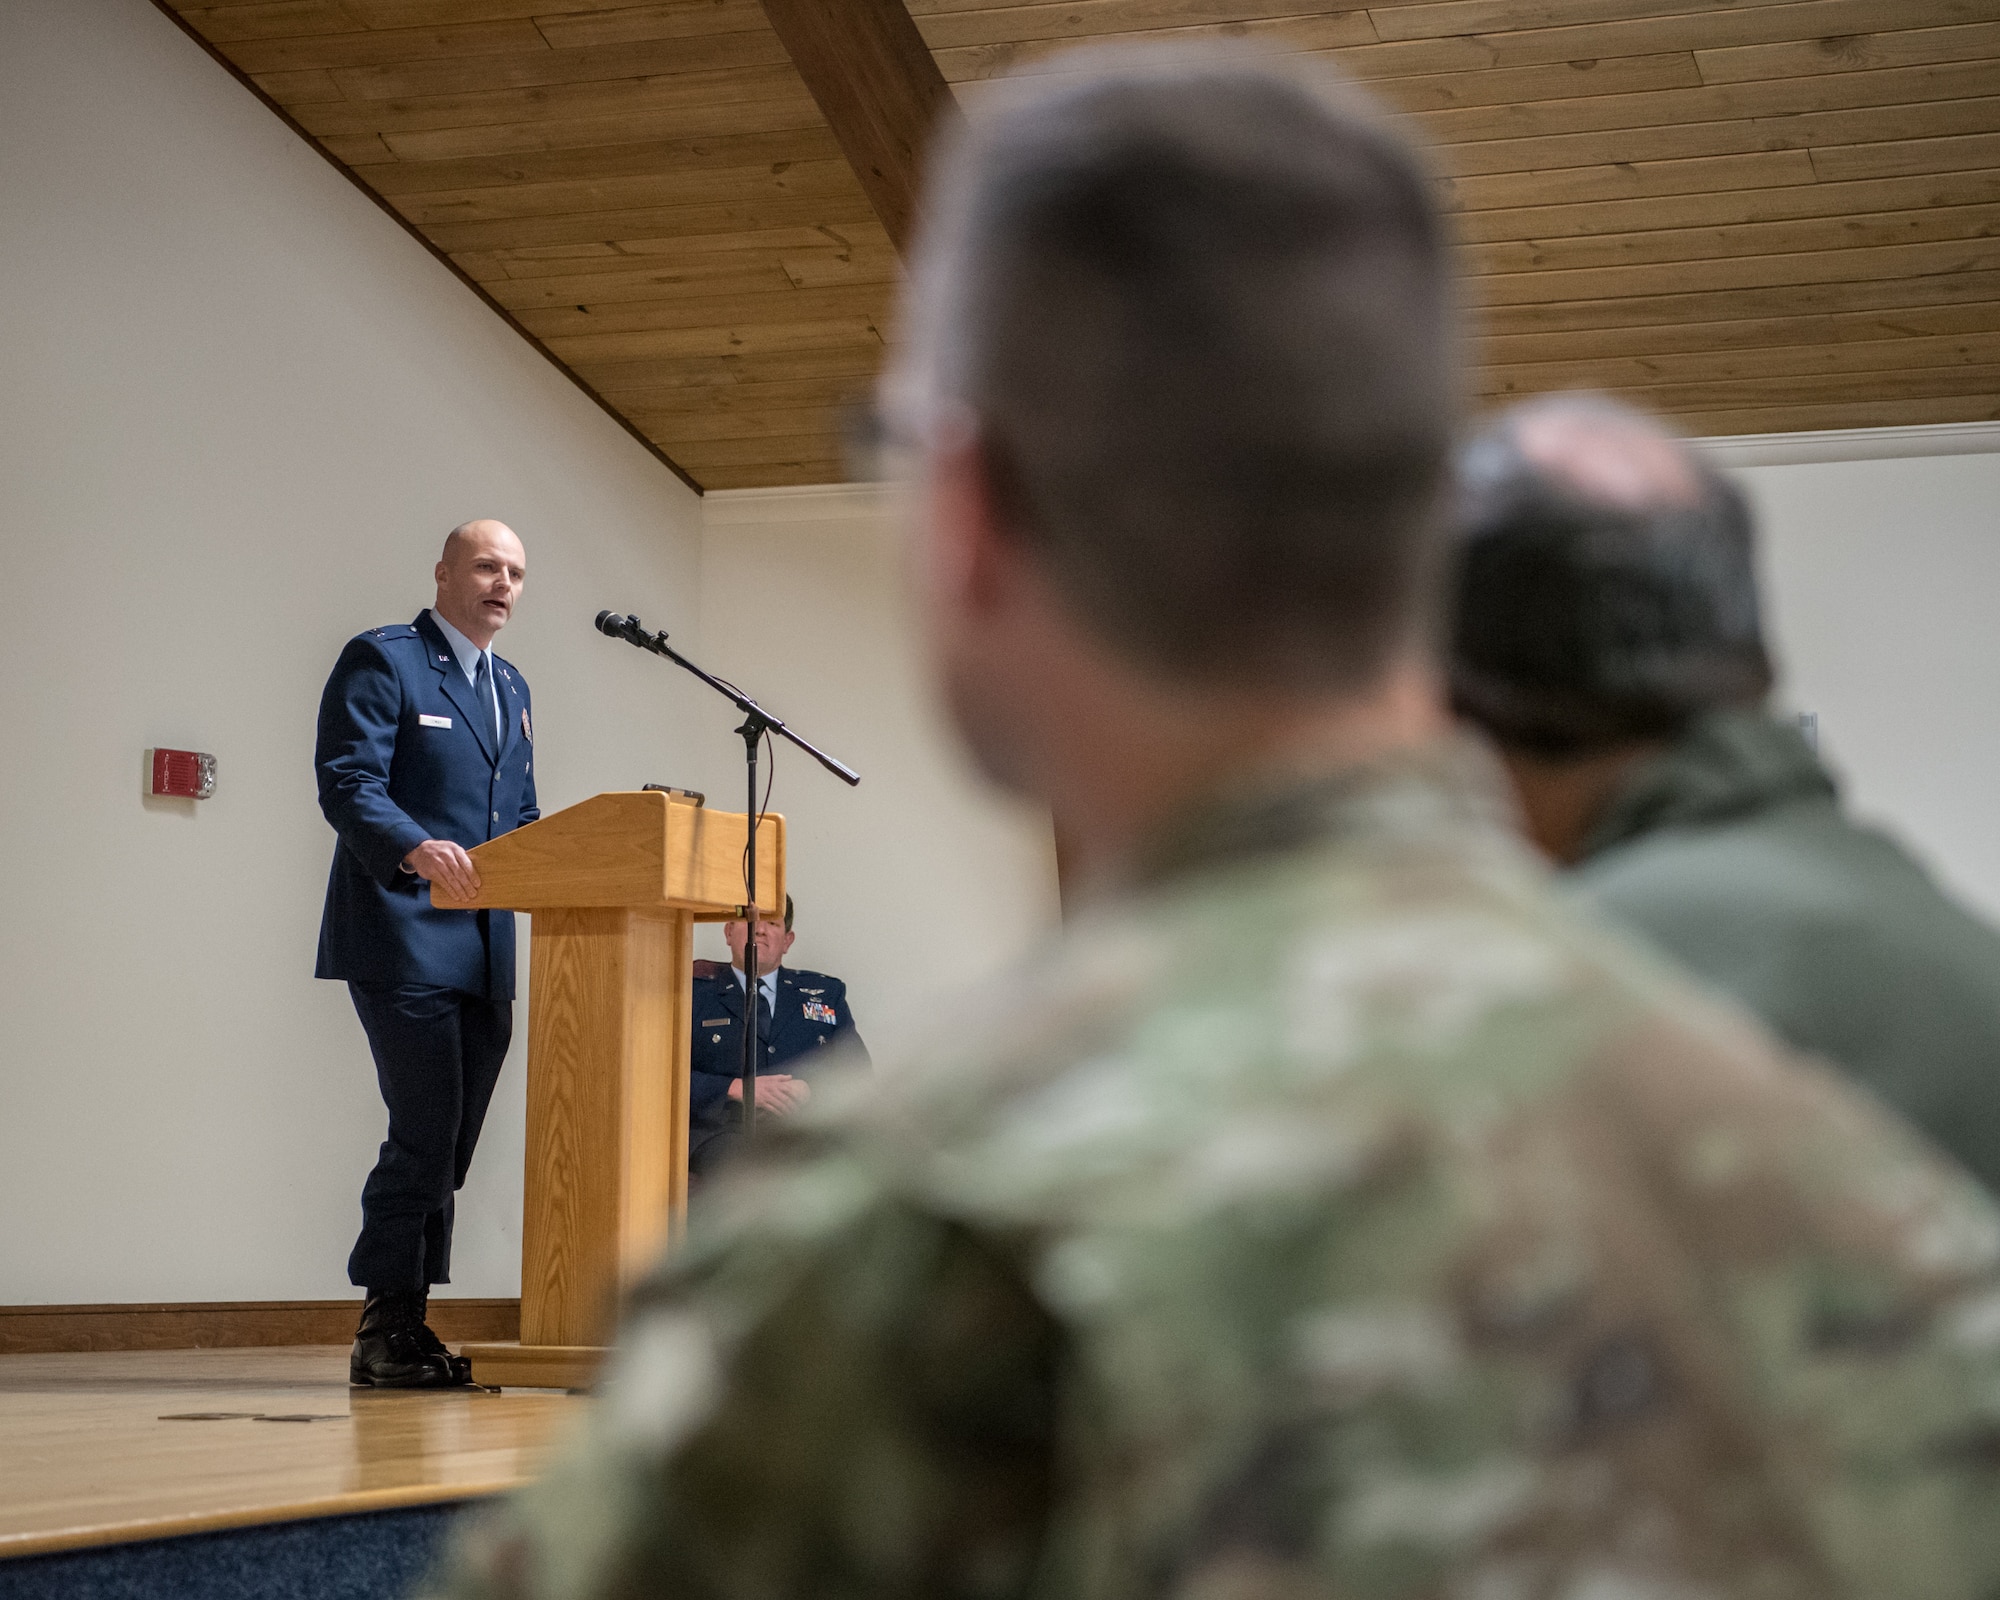 Capt. Russ LeMay, Norse Troop officer in charge for the 123rd Special Tactics Squadron, speaks at the retirement ceremony of Chief Master Sgt. Aaron May, the outgoing chief enlisted manager for the 123rd Special Tactics Squadron, at the Kentucky Air National Guard Base in Louisville, Ky., on Dec. 7, 2019. May is retiring after more than 26 years of service to the Kentucky Air National Guard and U.S. Air Force. (U.S. Air National Guard photo by Staff Sgt. Joshua Horton)